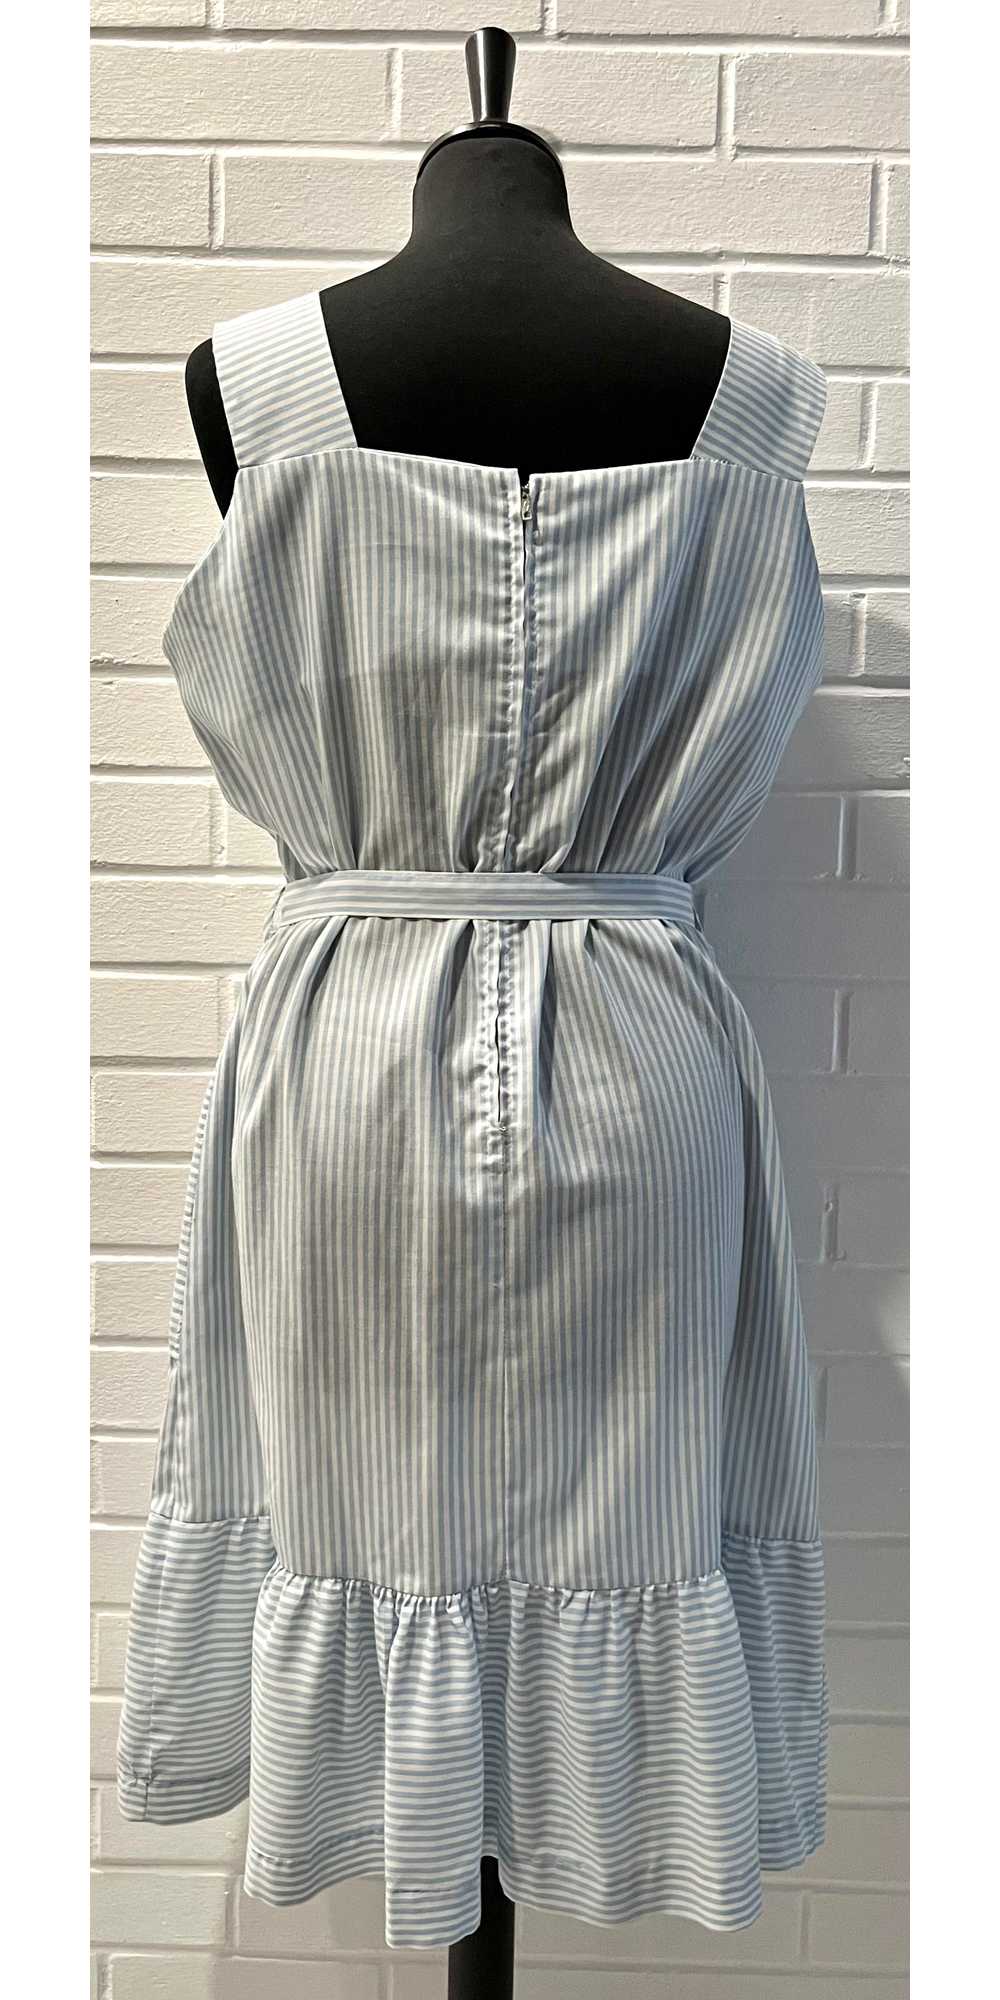 1960s Striped Embroidered Sundress/ Housedress - image 2